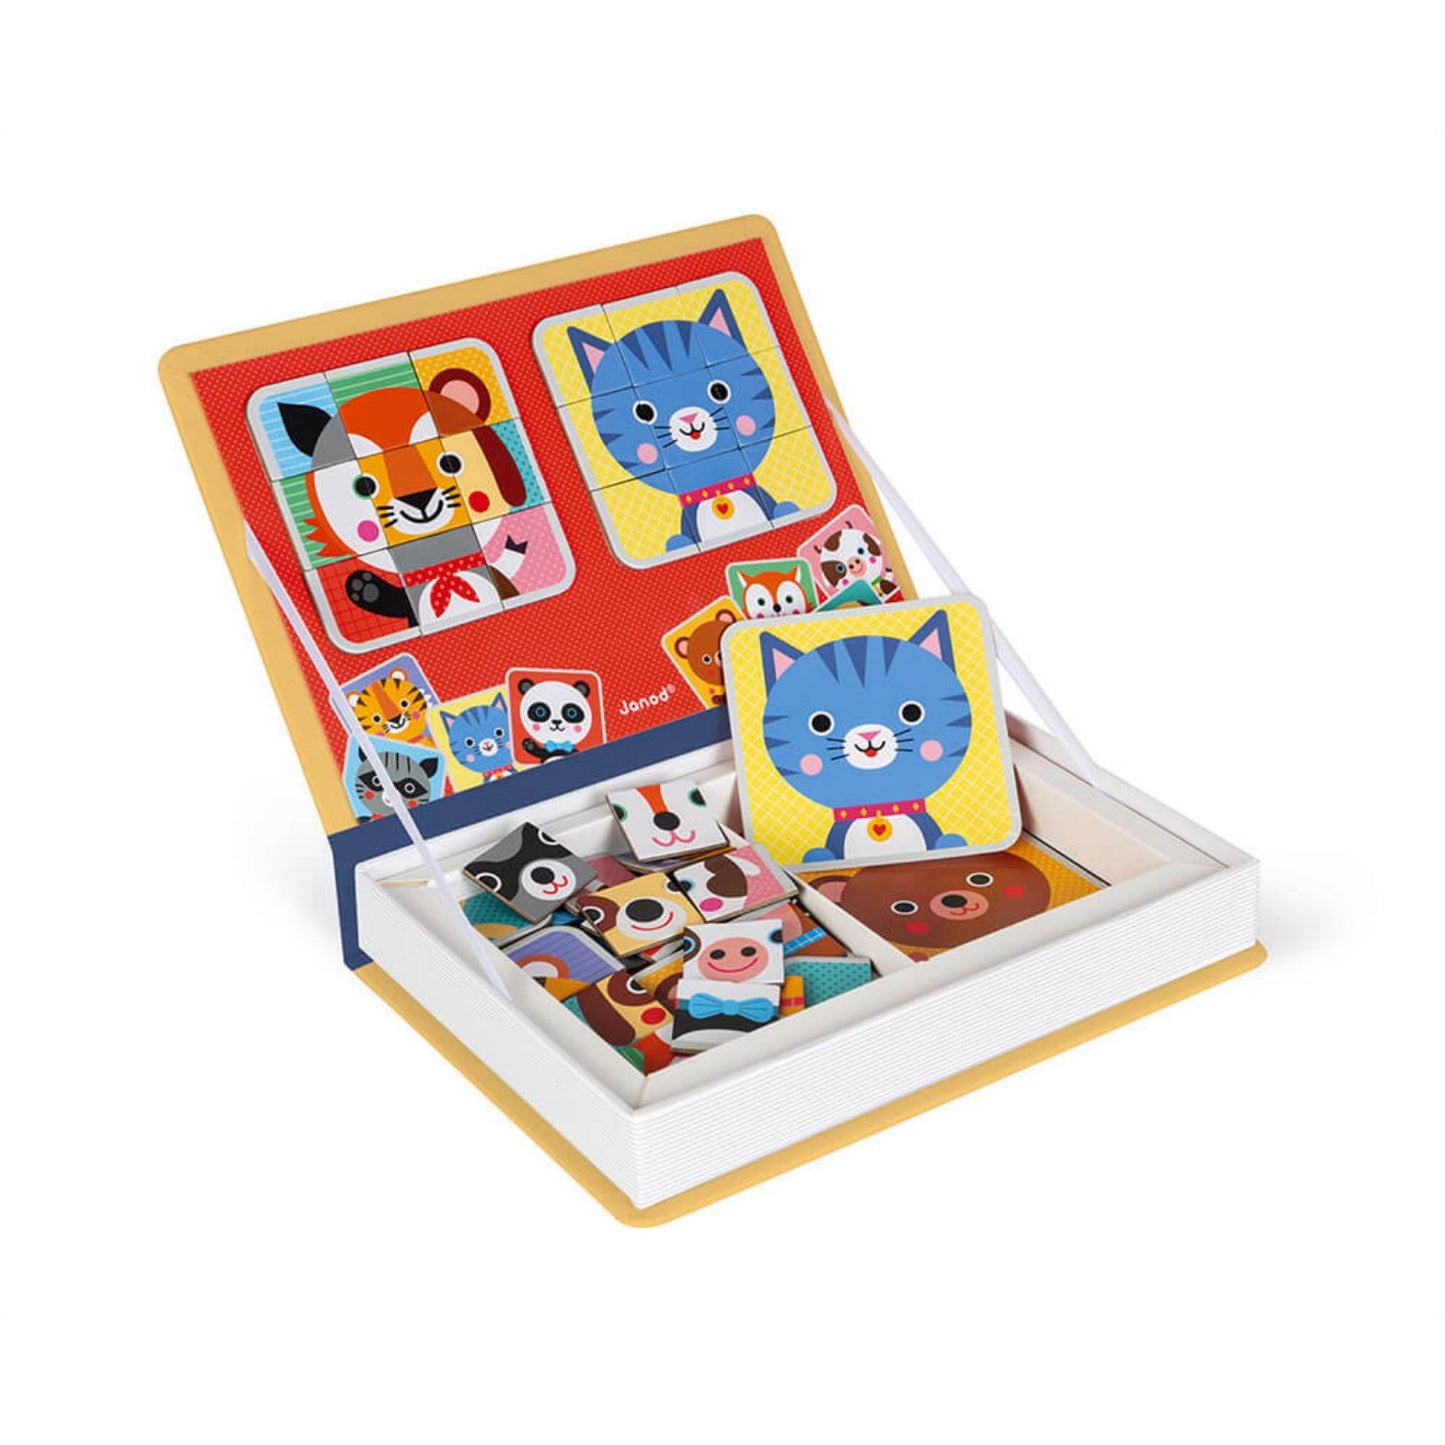 Mix & Match | Magnetibook | Educational Toy For Kids